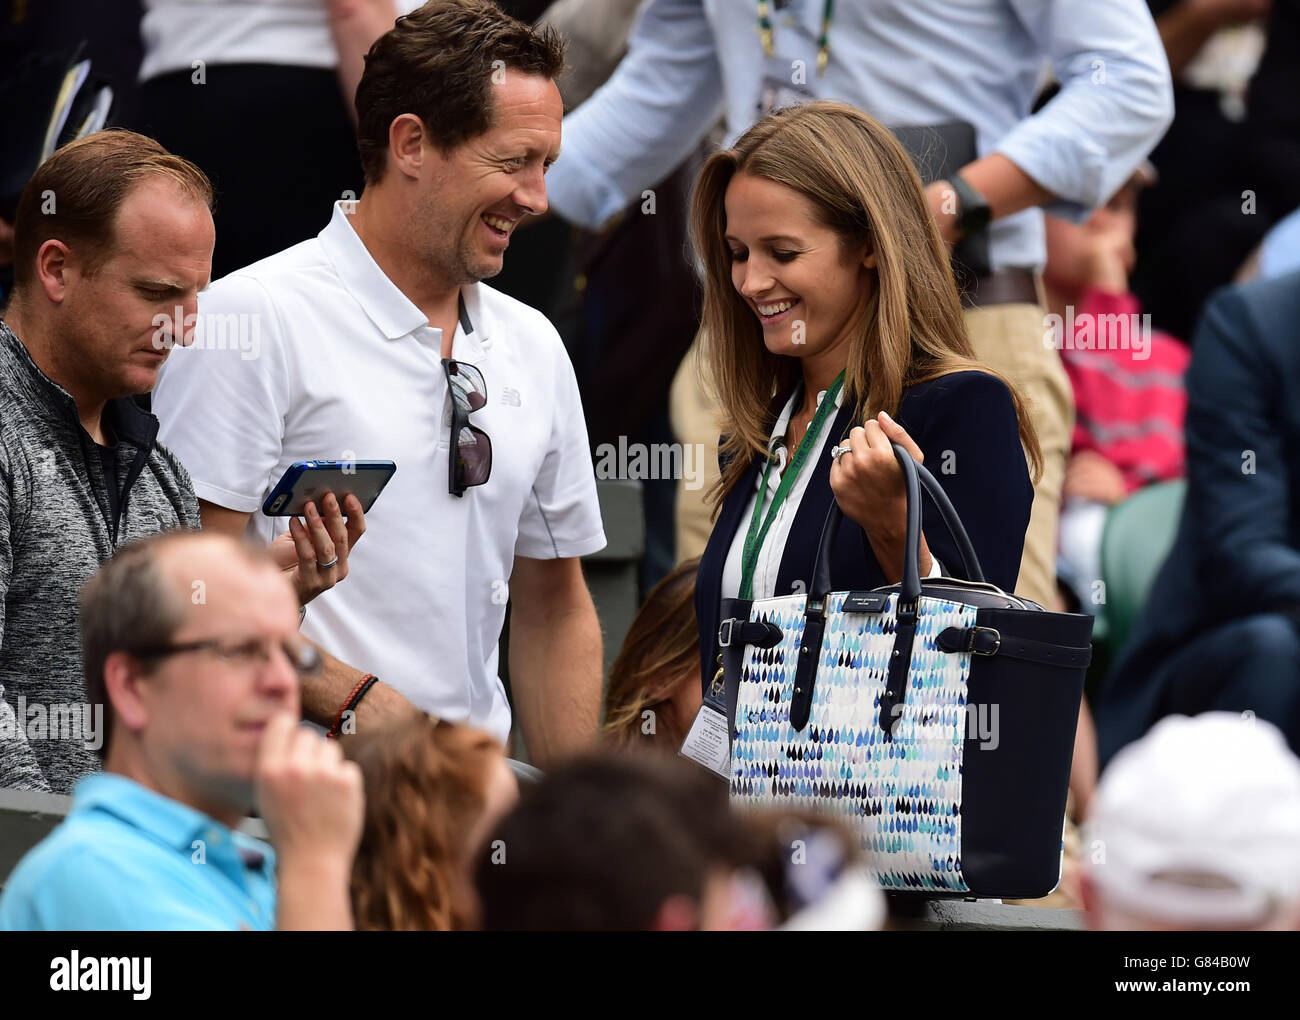 Kim Murray in the players box with Jonas Bjorkman during day Nine of the Wimbledon Championships at the All England Lawn Tennis and Croquet Club, Wimbledon. Stock Photo